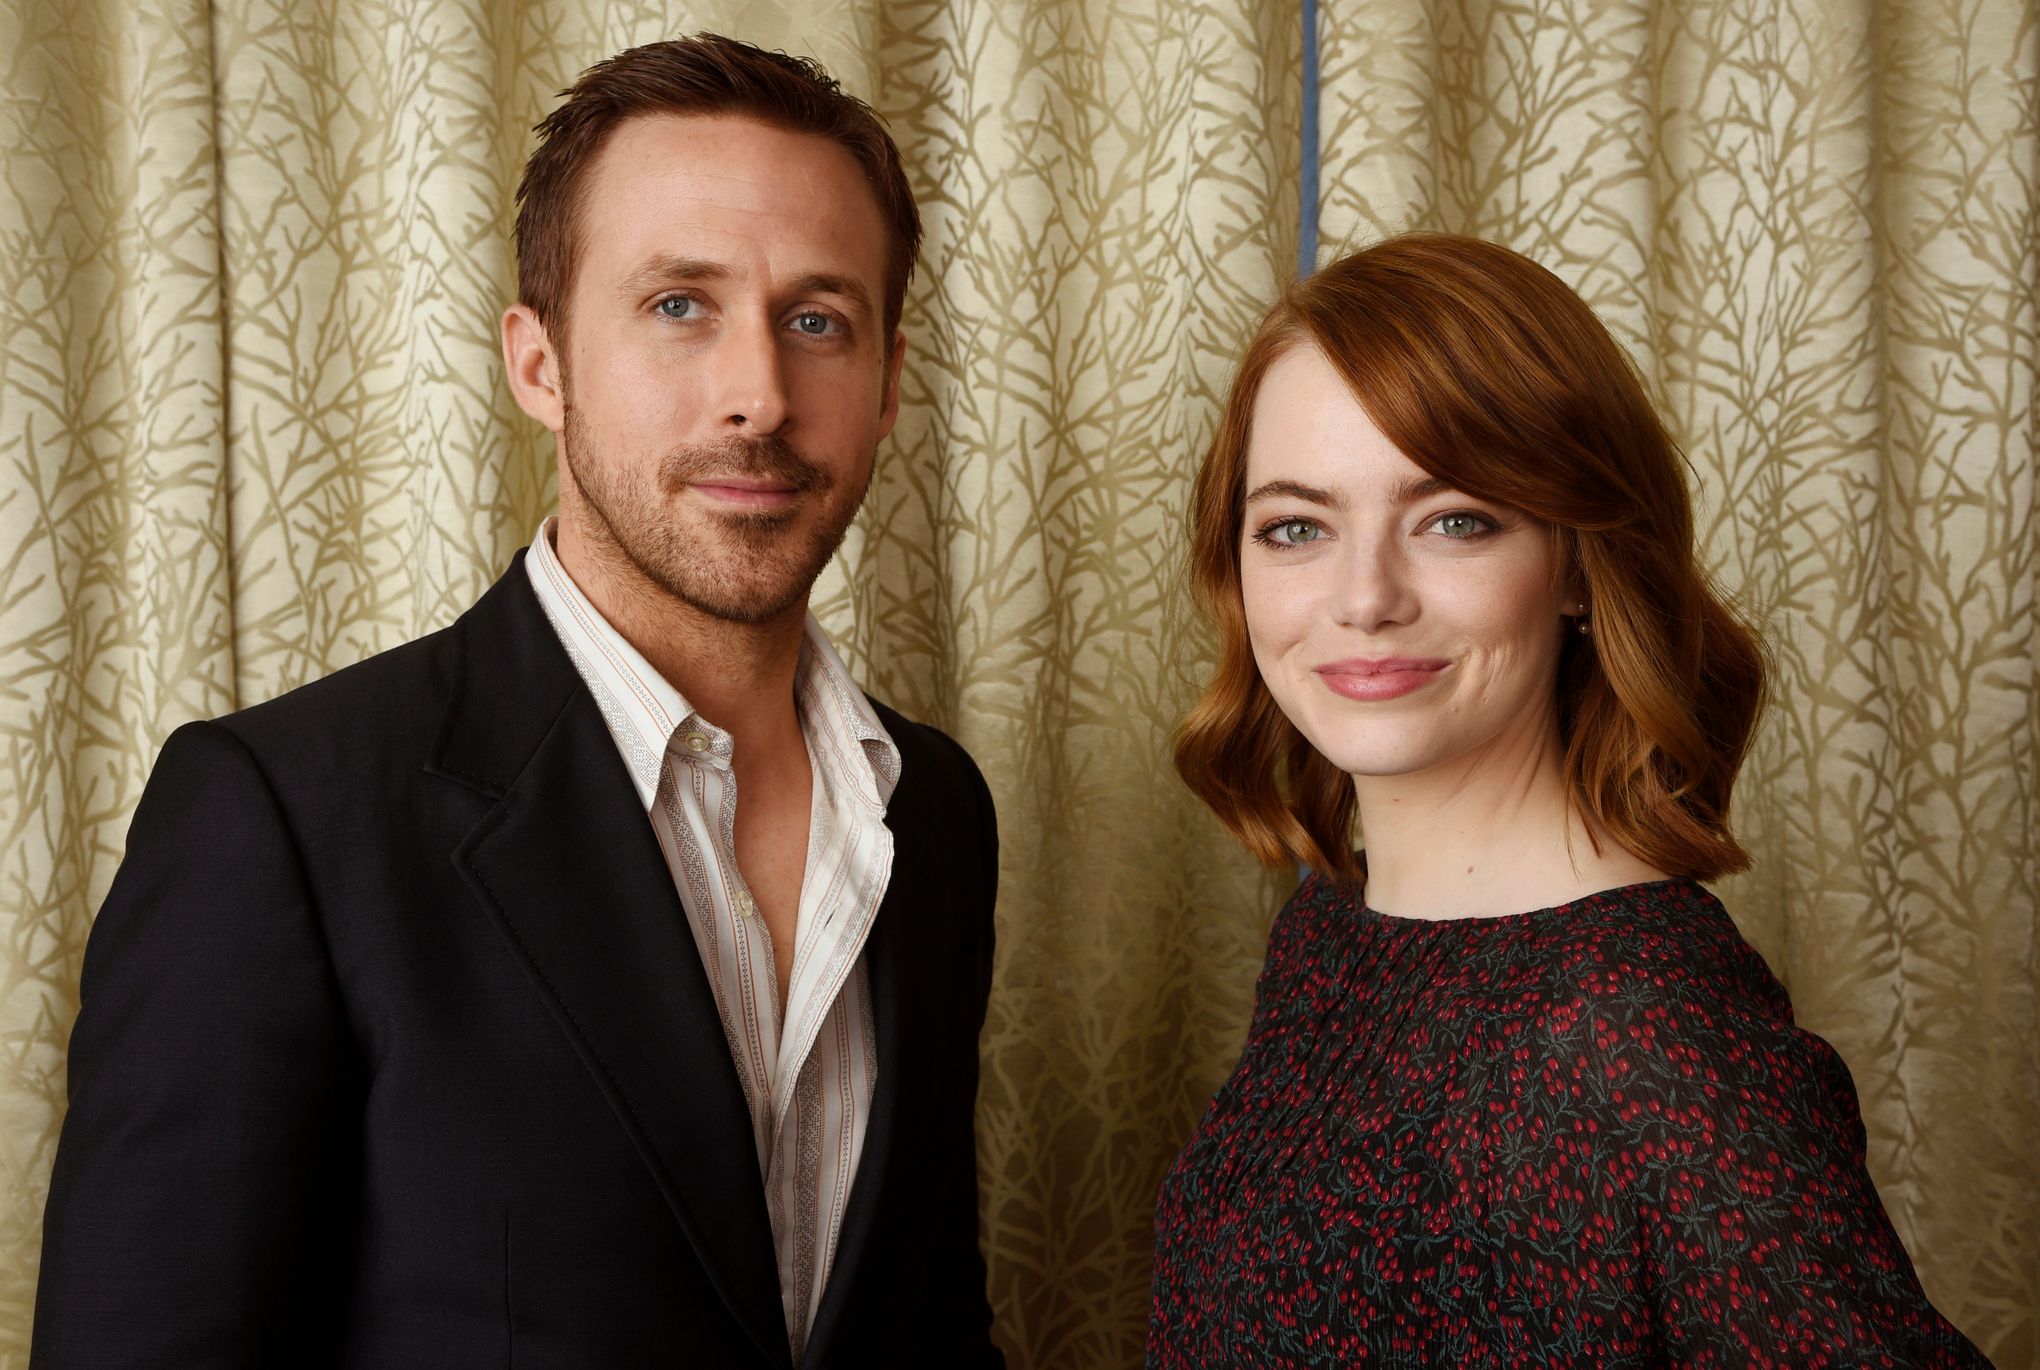 La La Land Inspired Gifts For Ryan Gosling & Emma Stone Fans – IndieWire